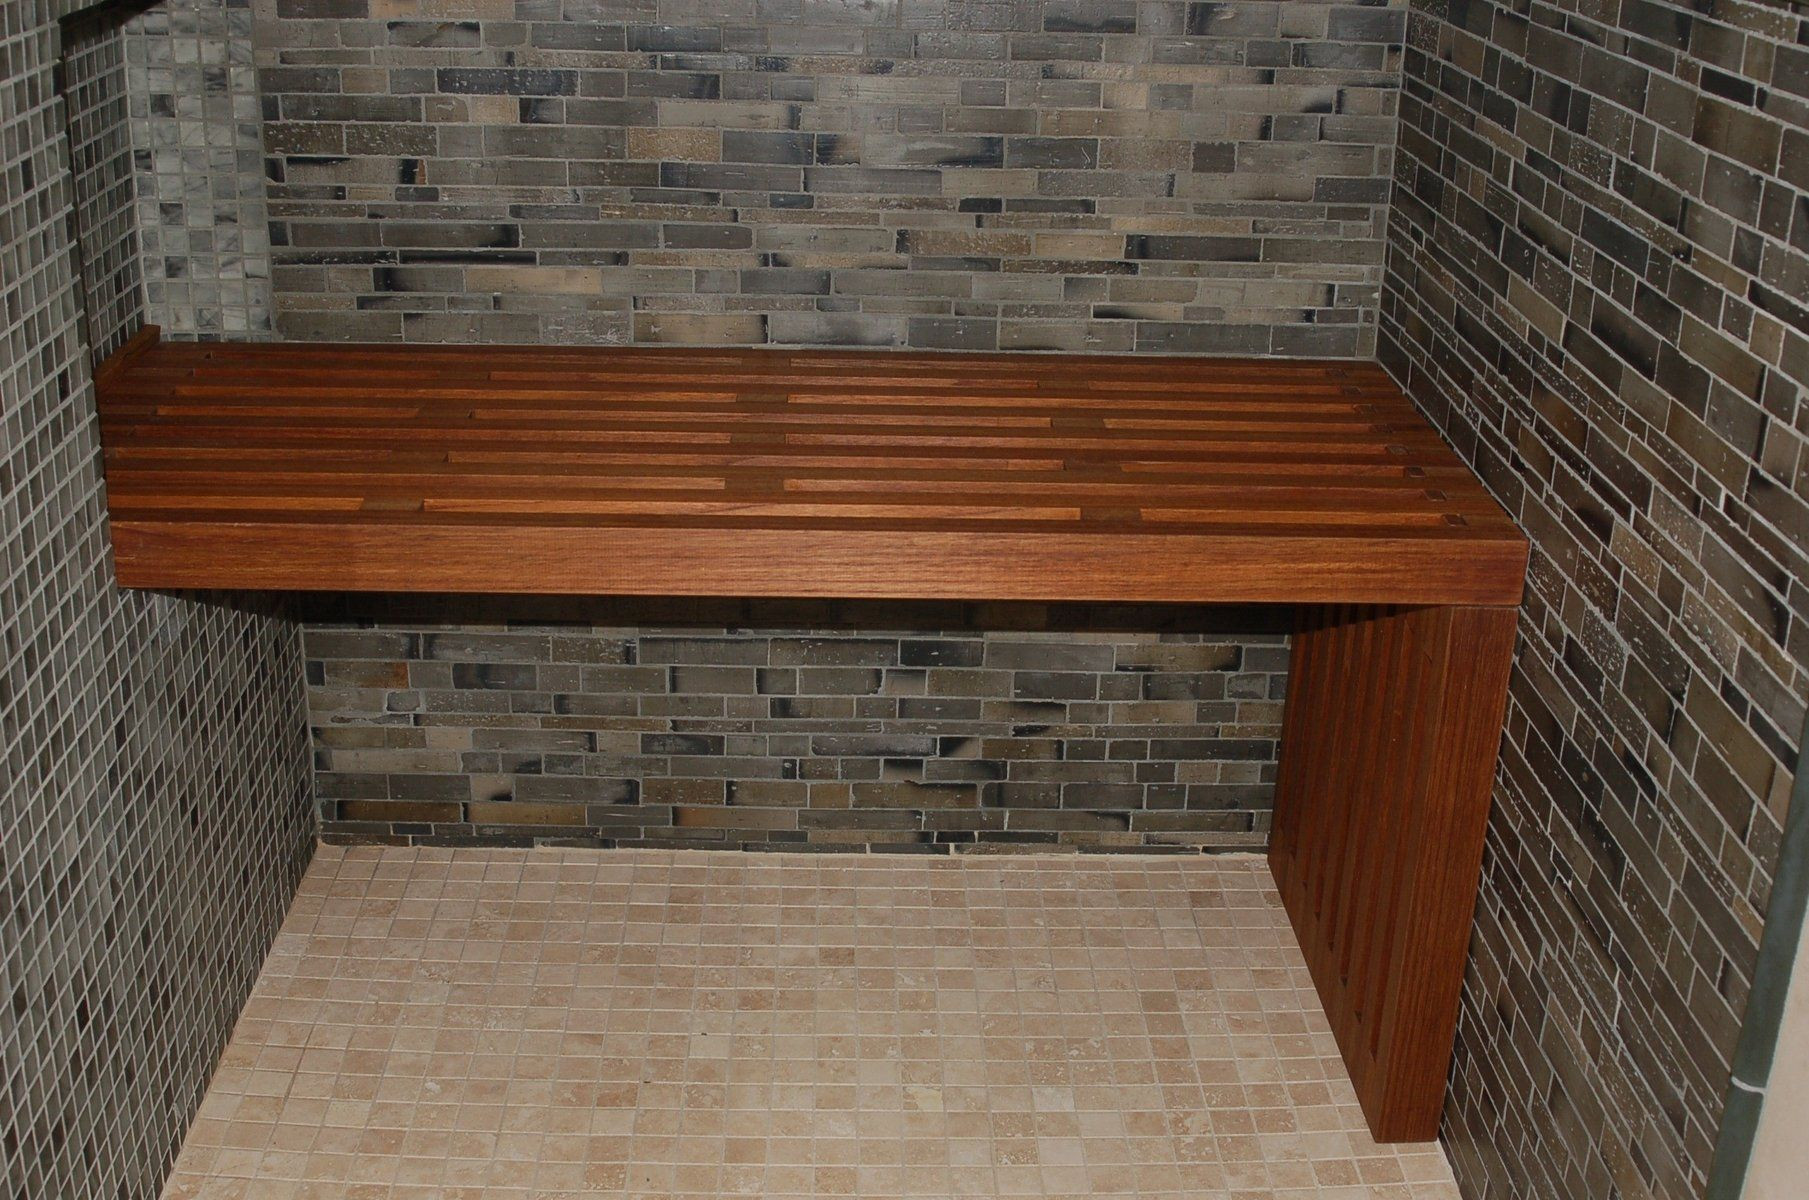 11 Best Hardwood Floor Tile In Bathroom 2022 free download hardwood floor tile in bathroom of teak shower bench for your breathtaking furniture ideas handicapped with ingenious faux wood shower floor for wood floor